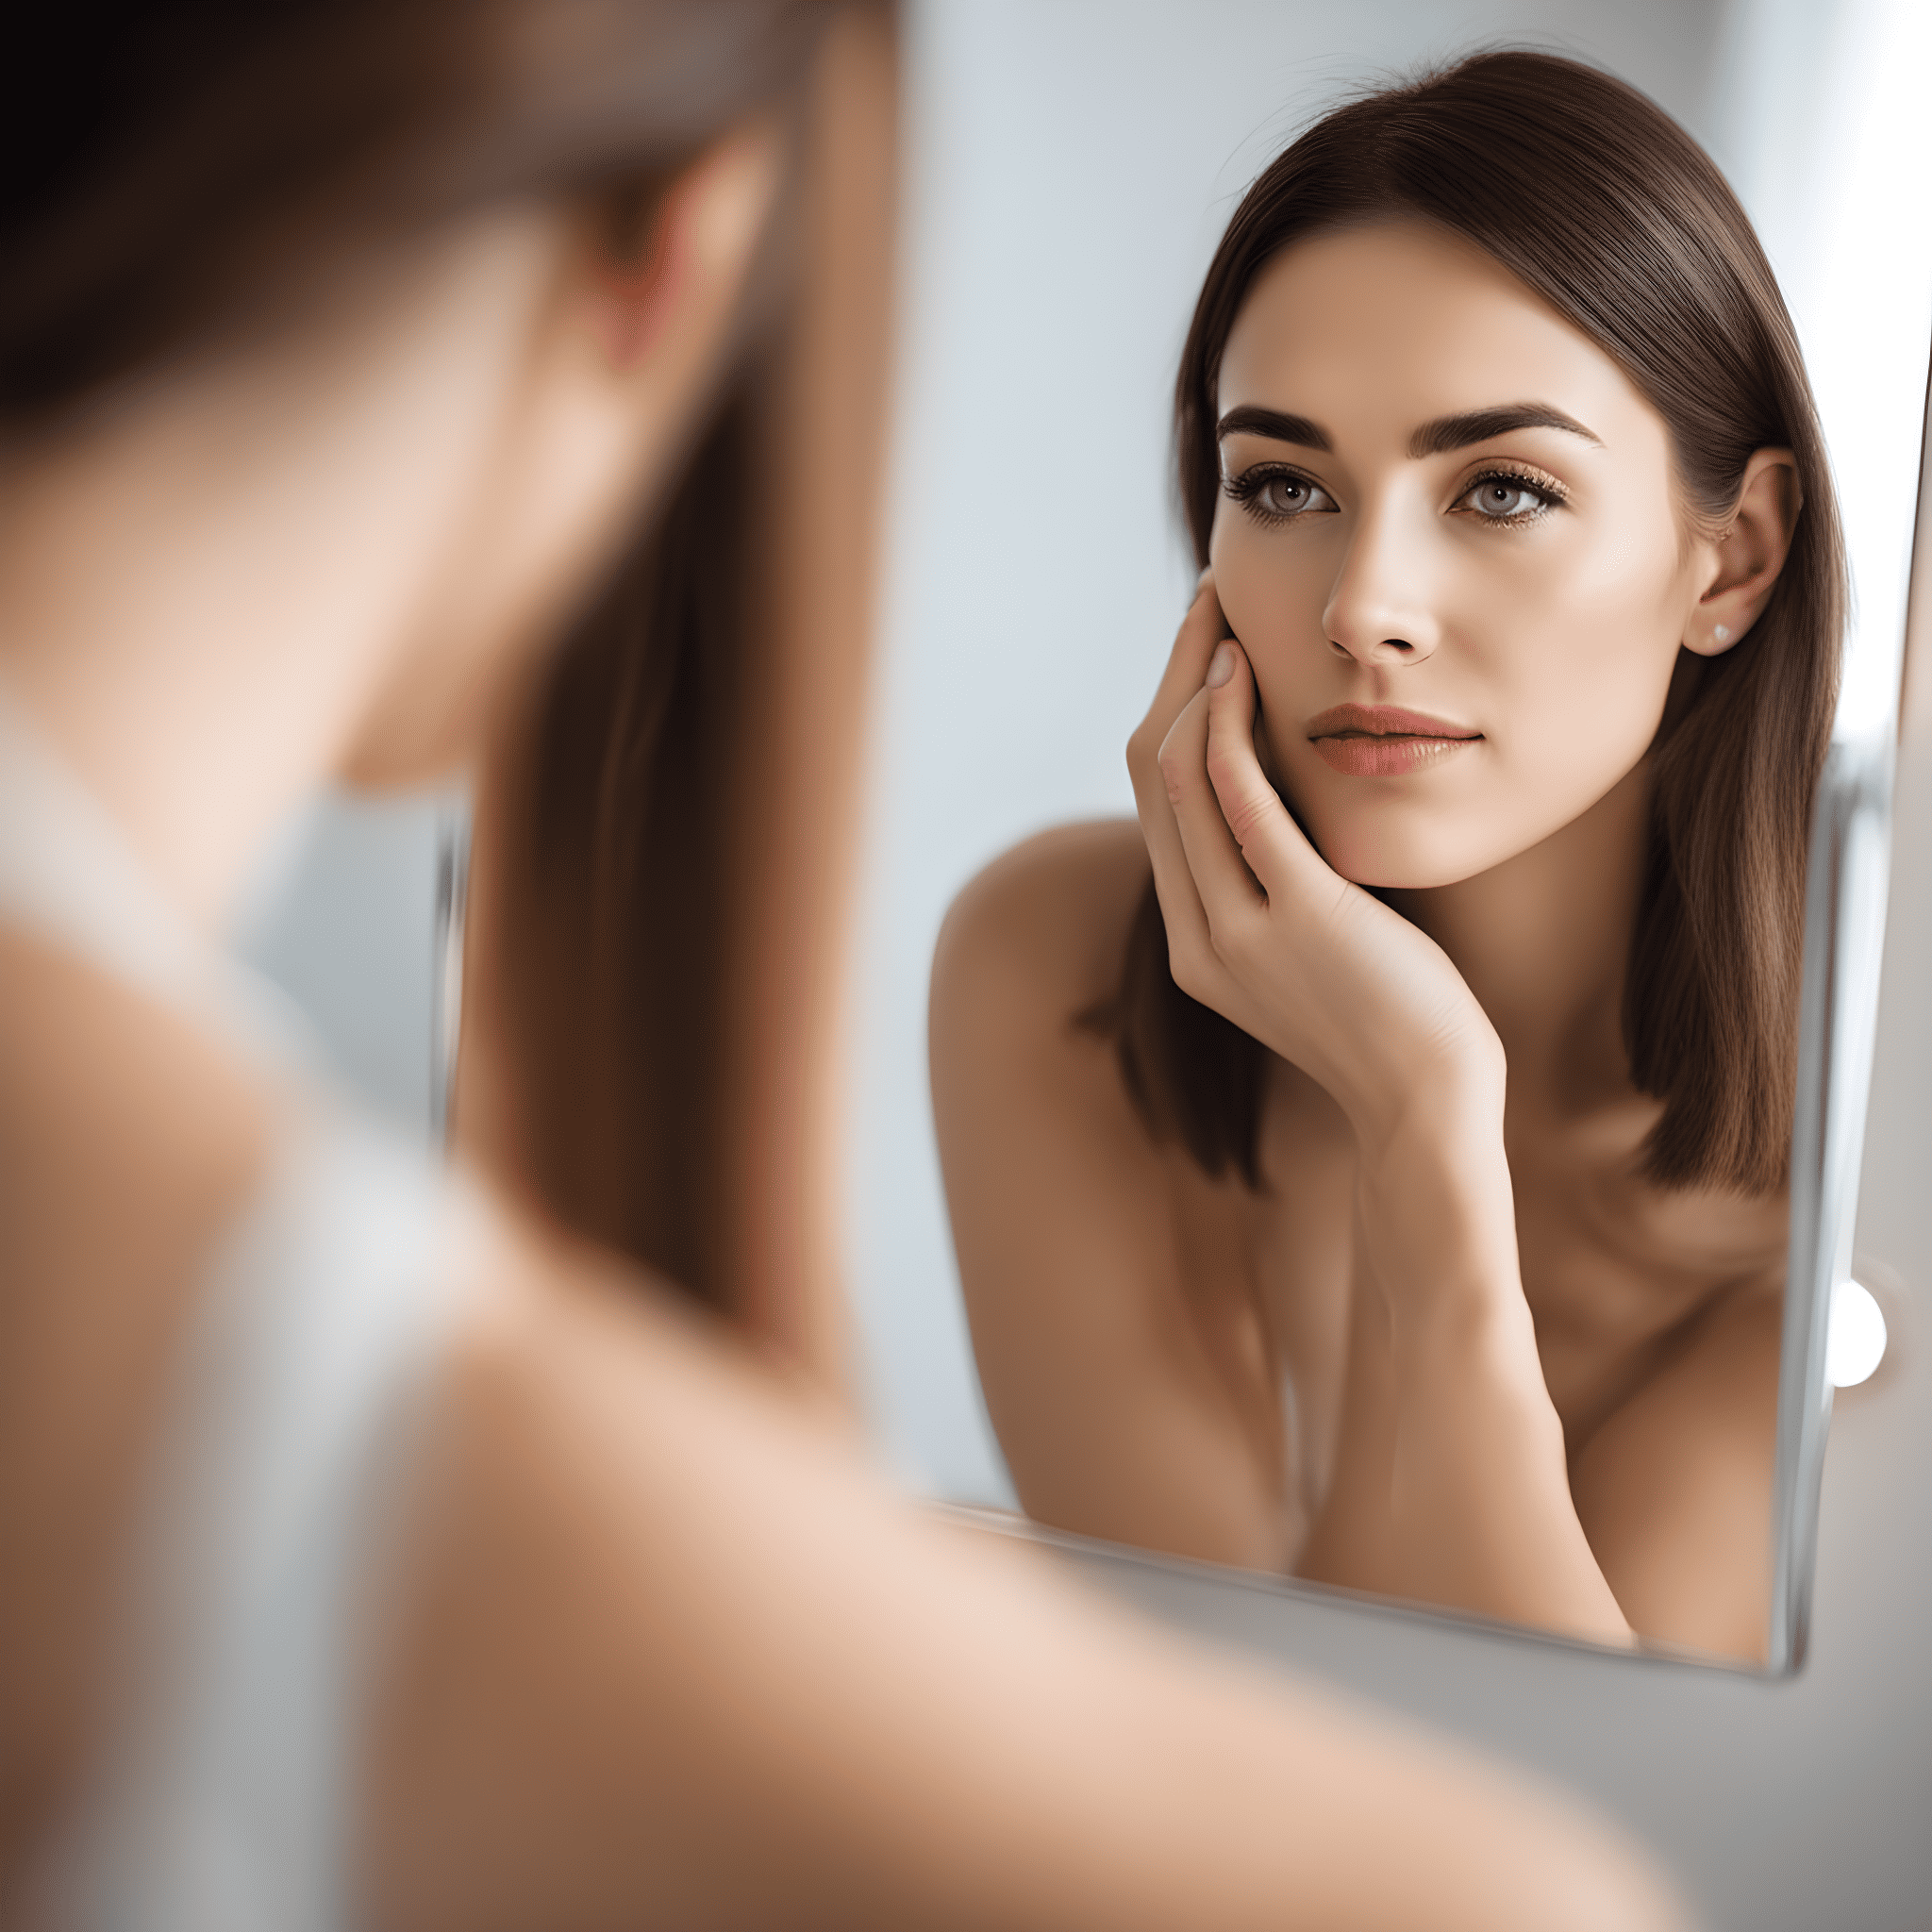 A woman with sensitive skin looking in the mirror